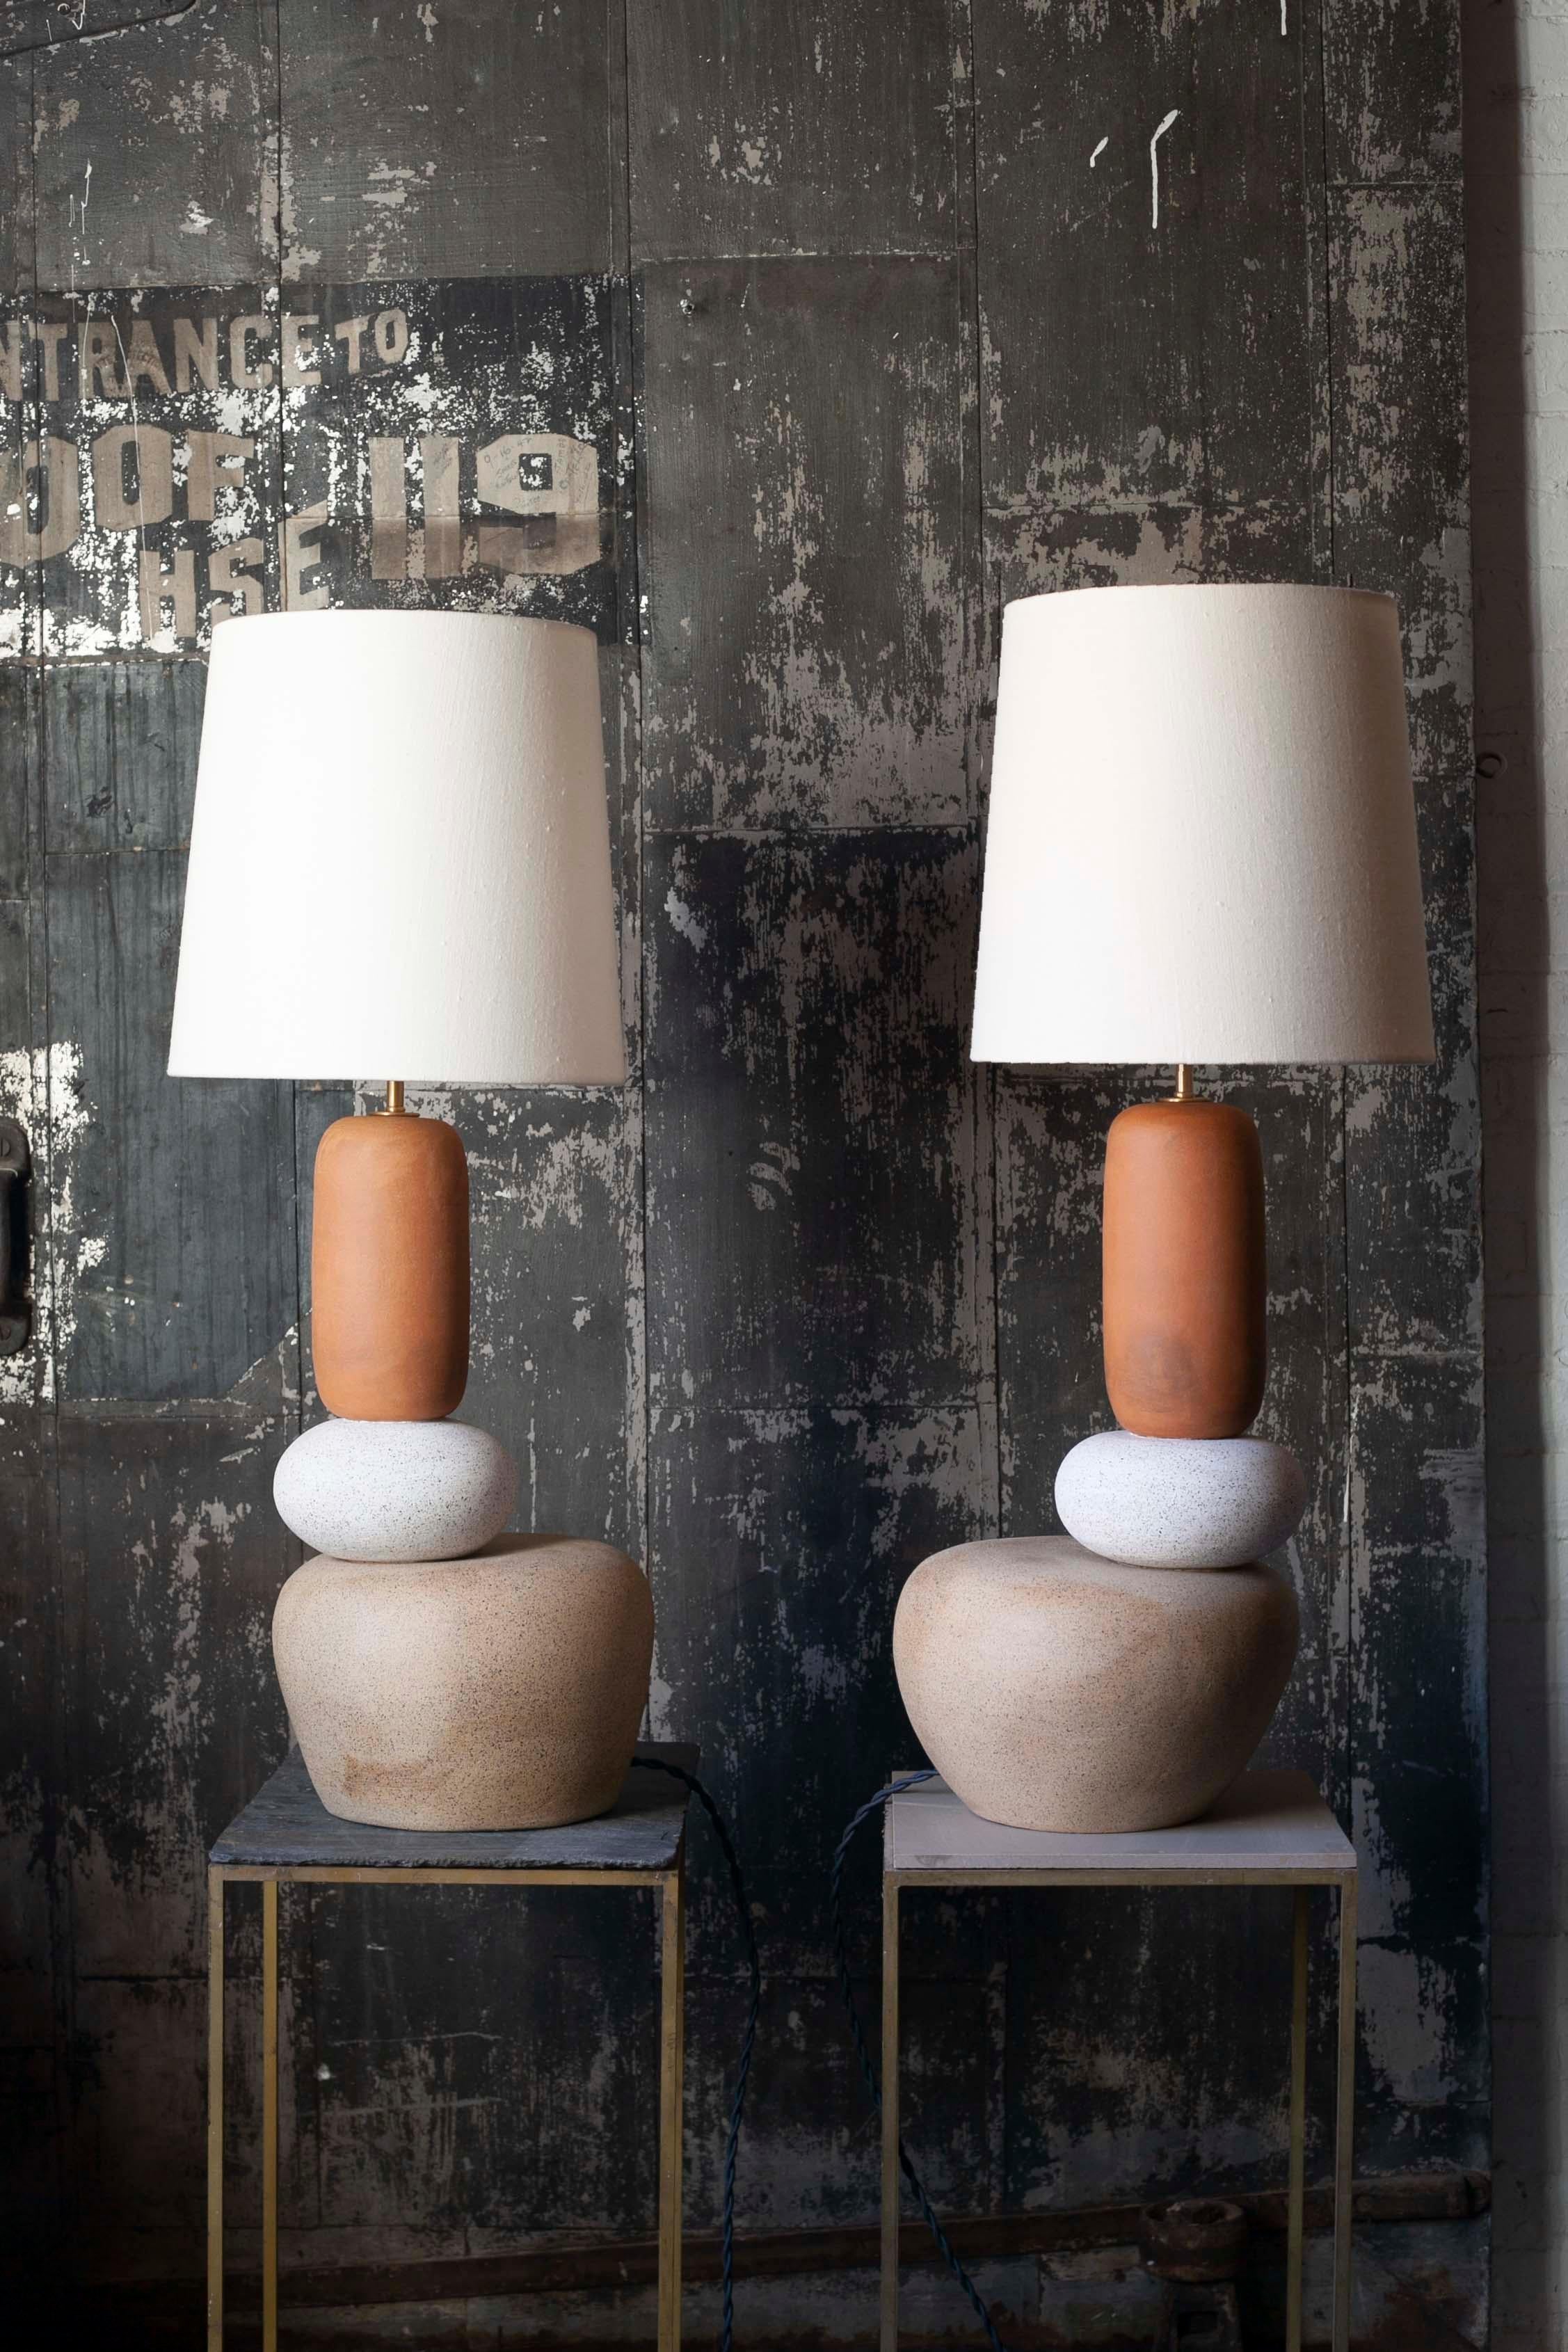 Pair of one of a kind ceramic lamps, thrown on the potters wheel and assembled by hand. The lamp base is comprised of two different clay bodies and features a raw, unglazed ceramic surface to highlight the texture of natural clay. These pieces are